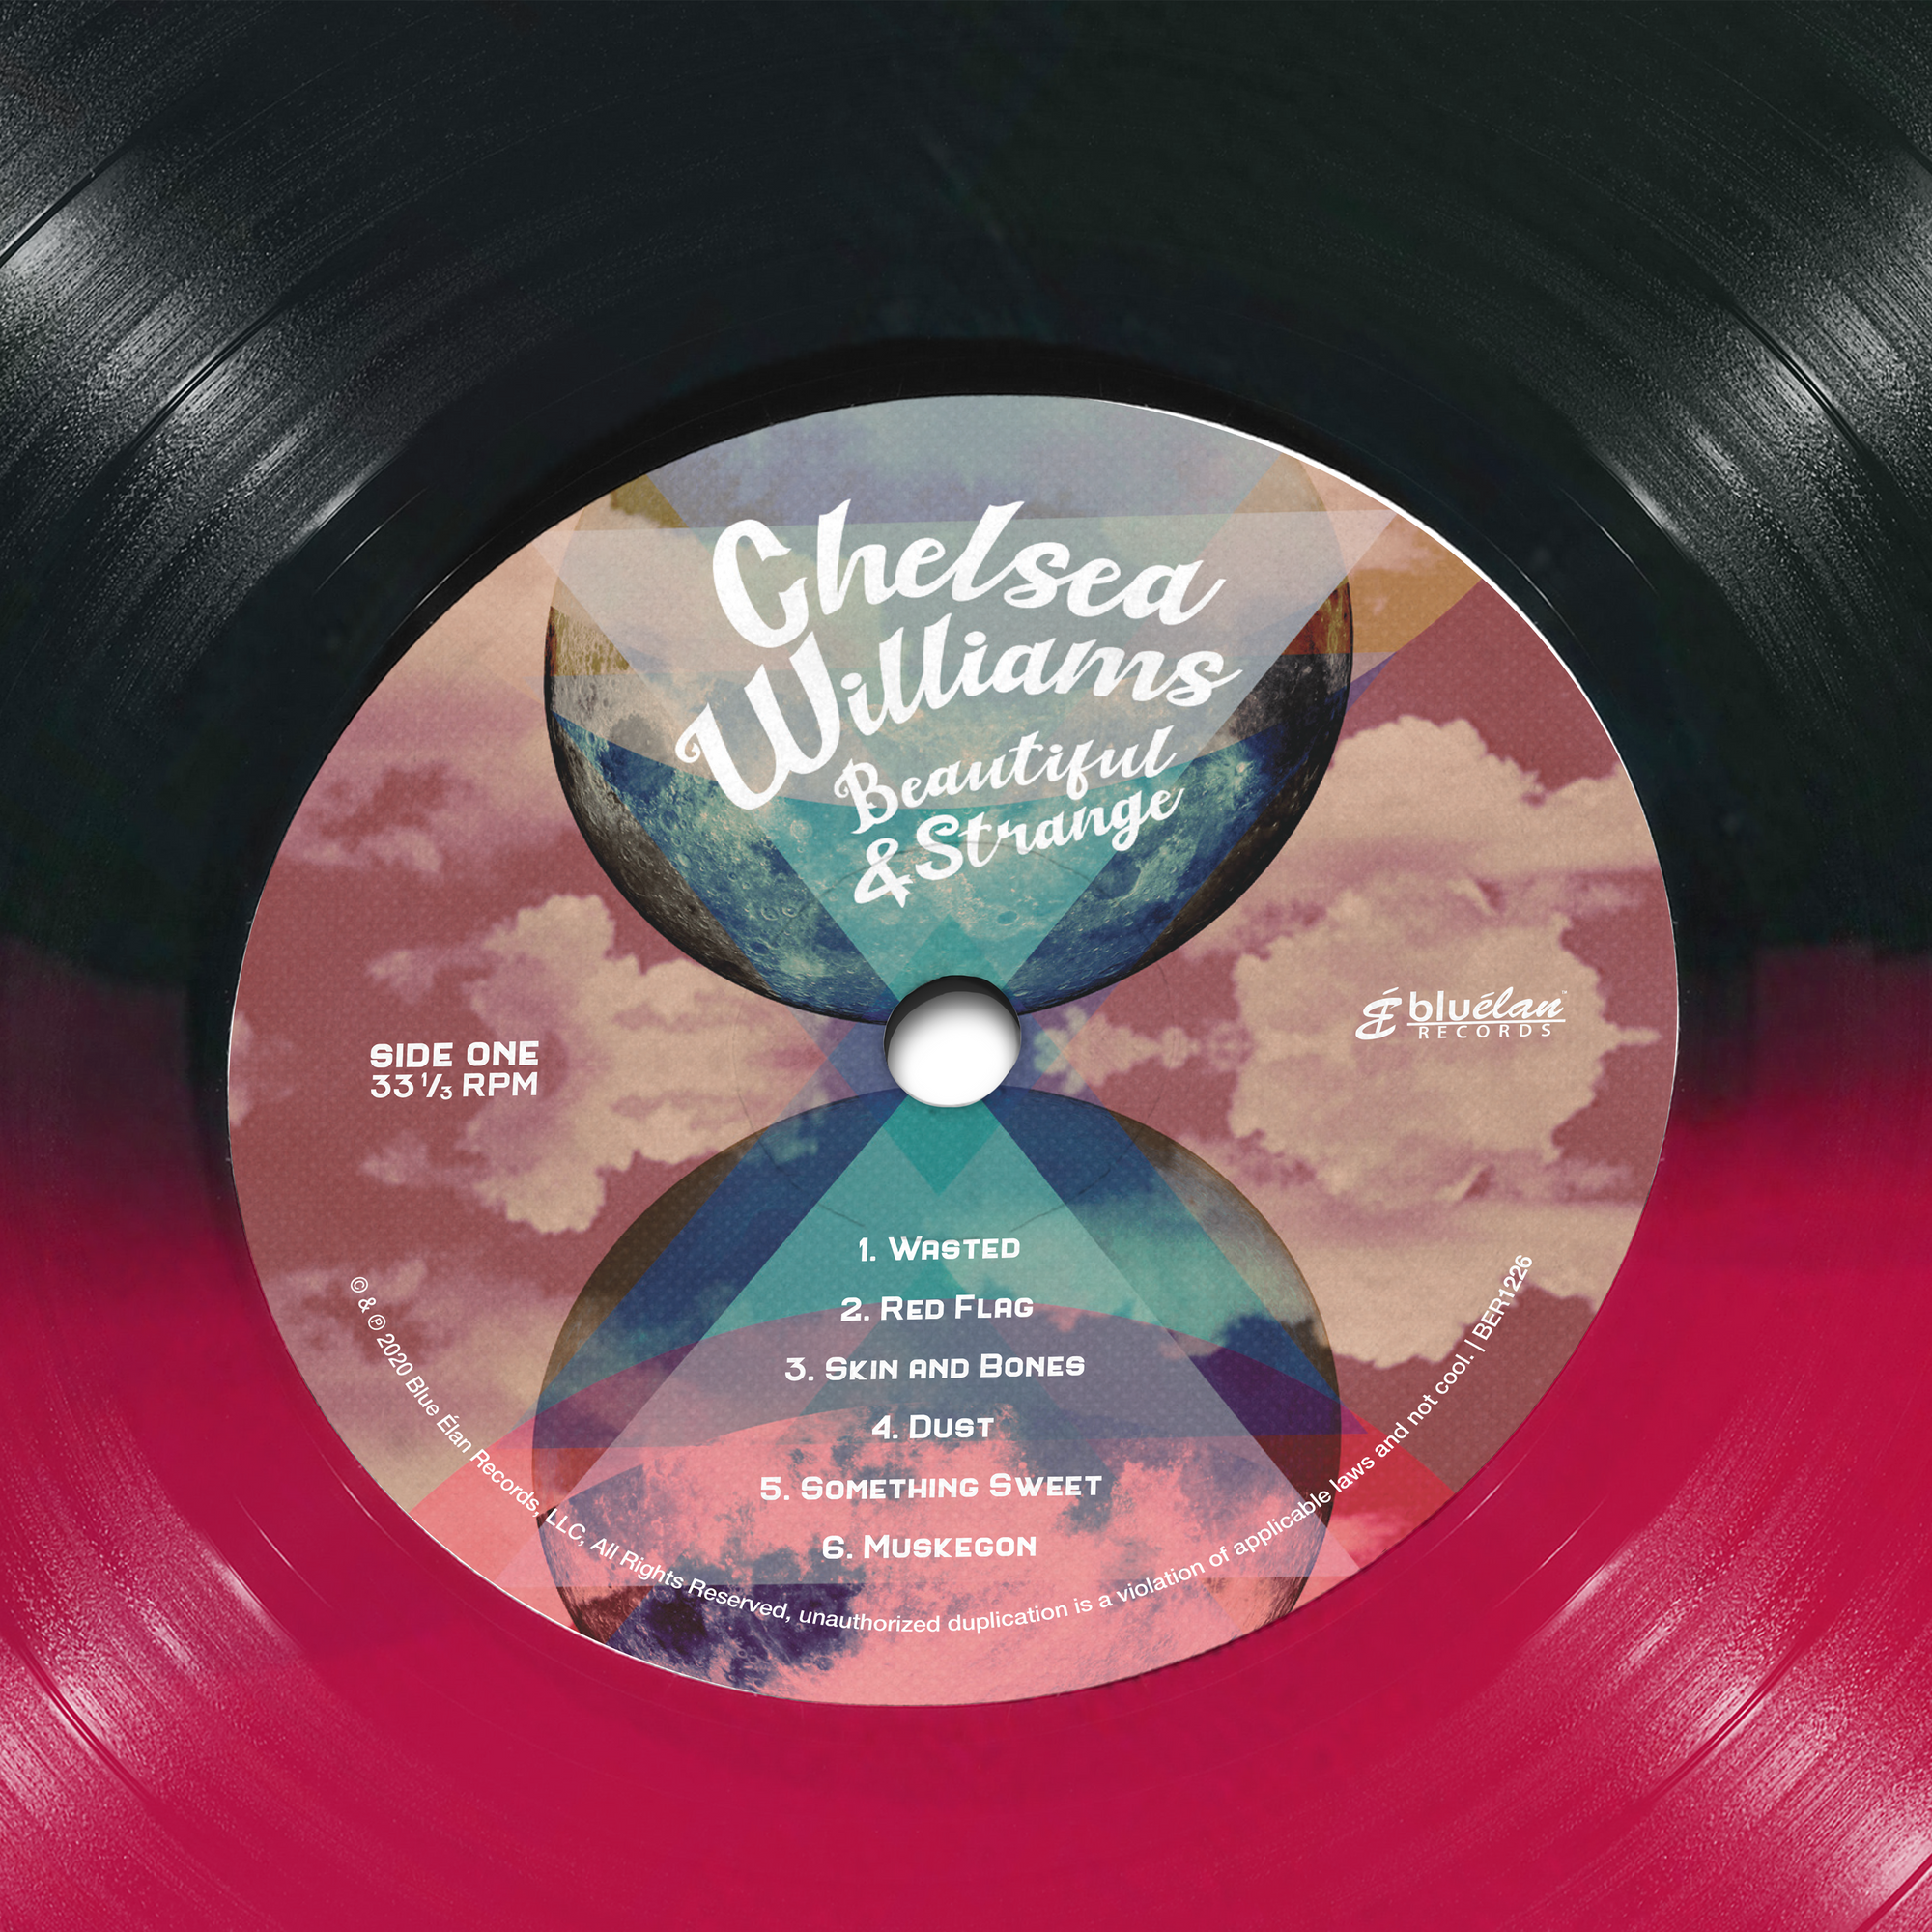 You Could Win Chelsea Williams' New Album on Vinyl